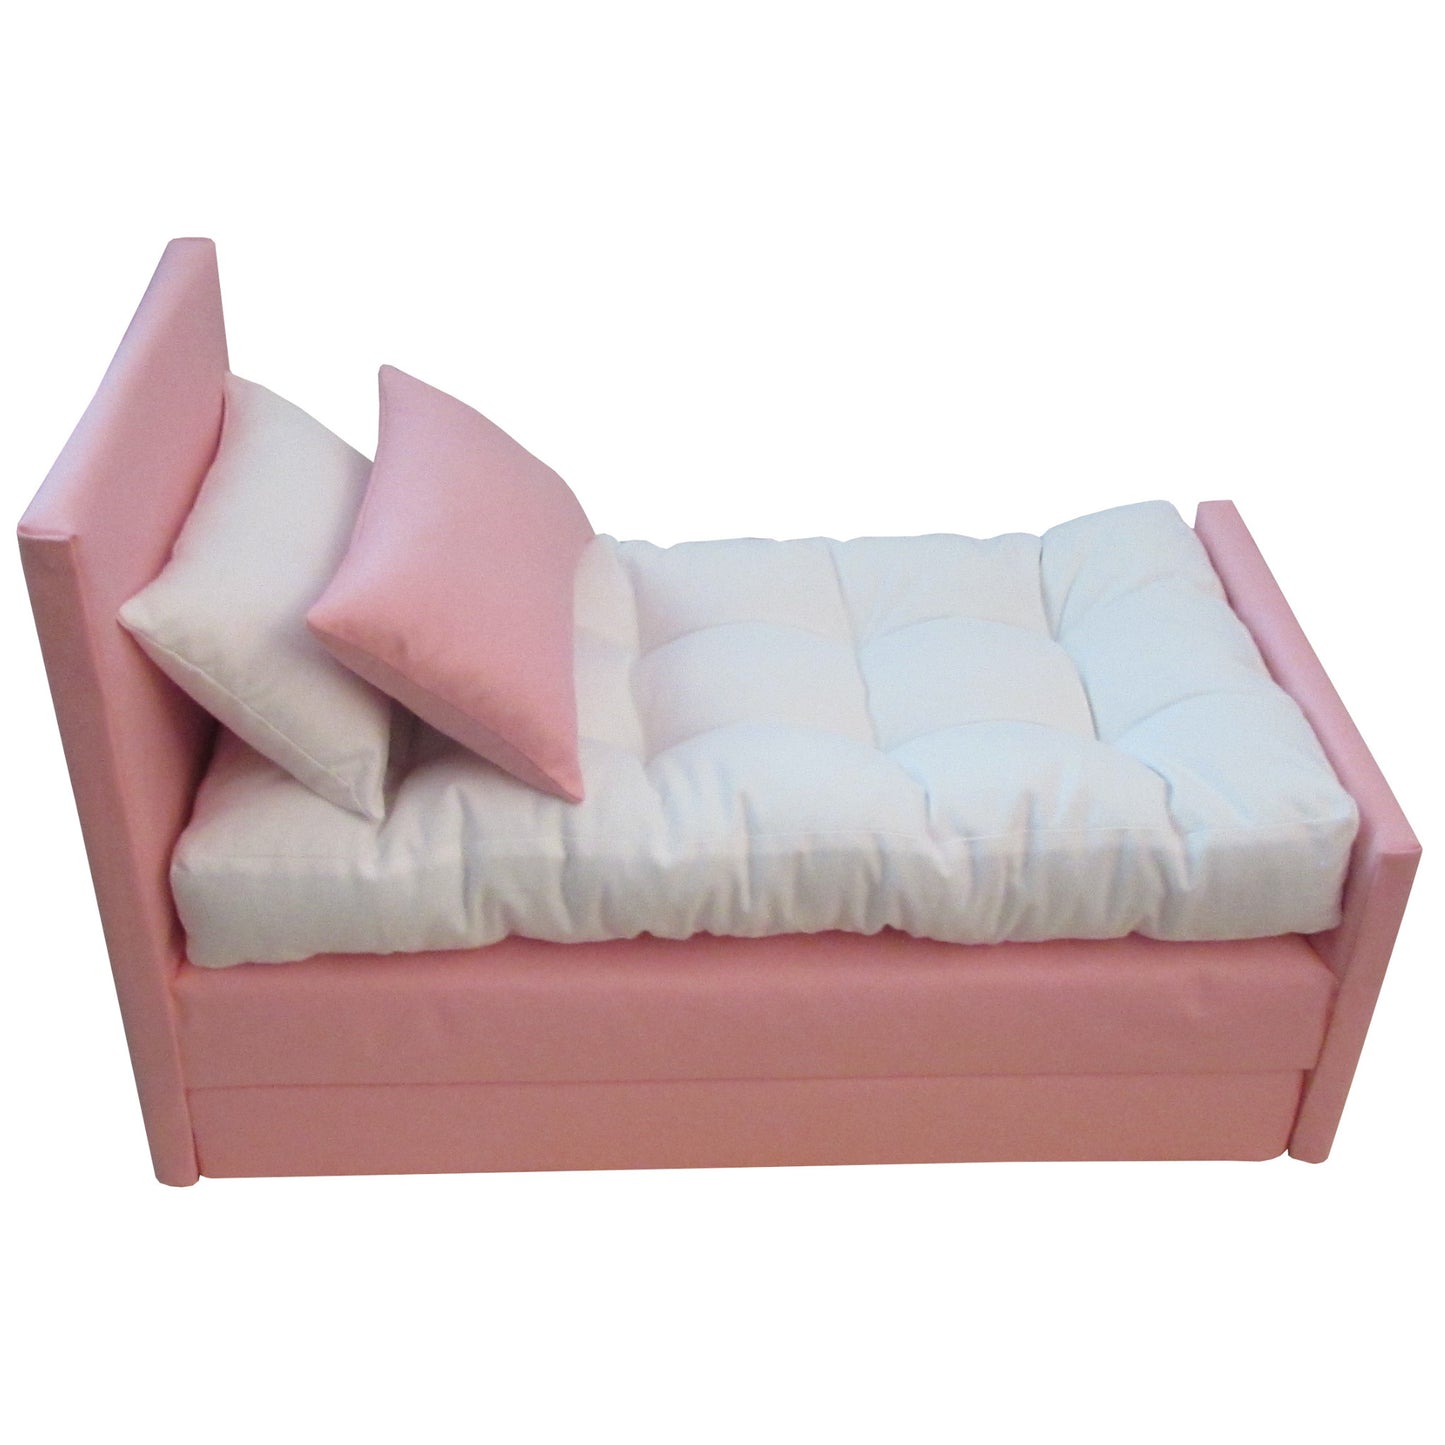 Upholstered Pink Trundle Bed Side View for 18-inch dolls